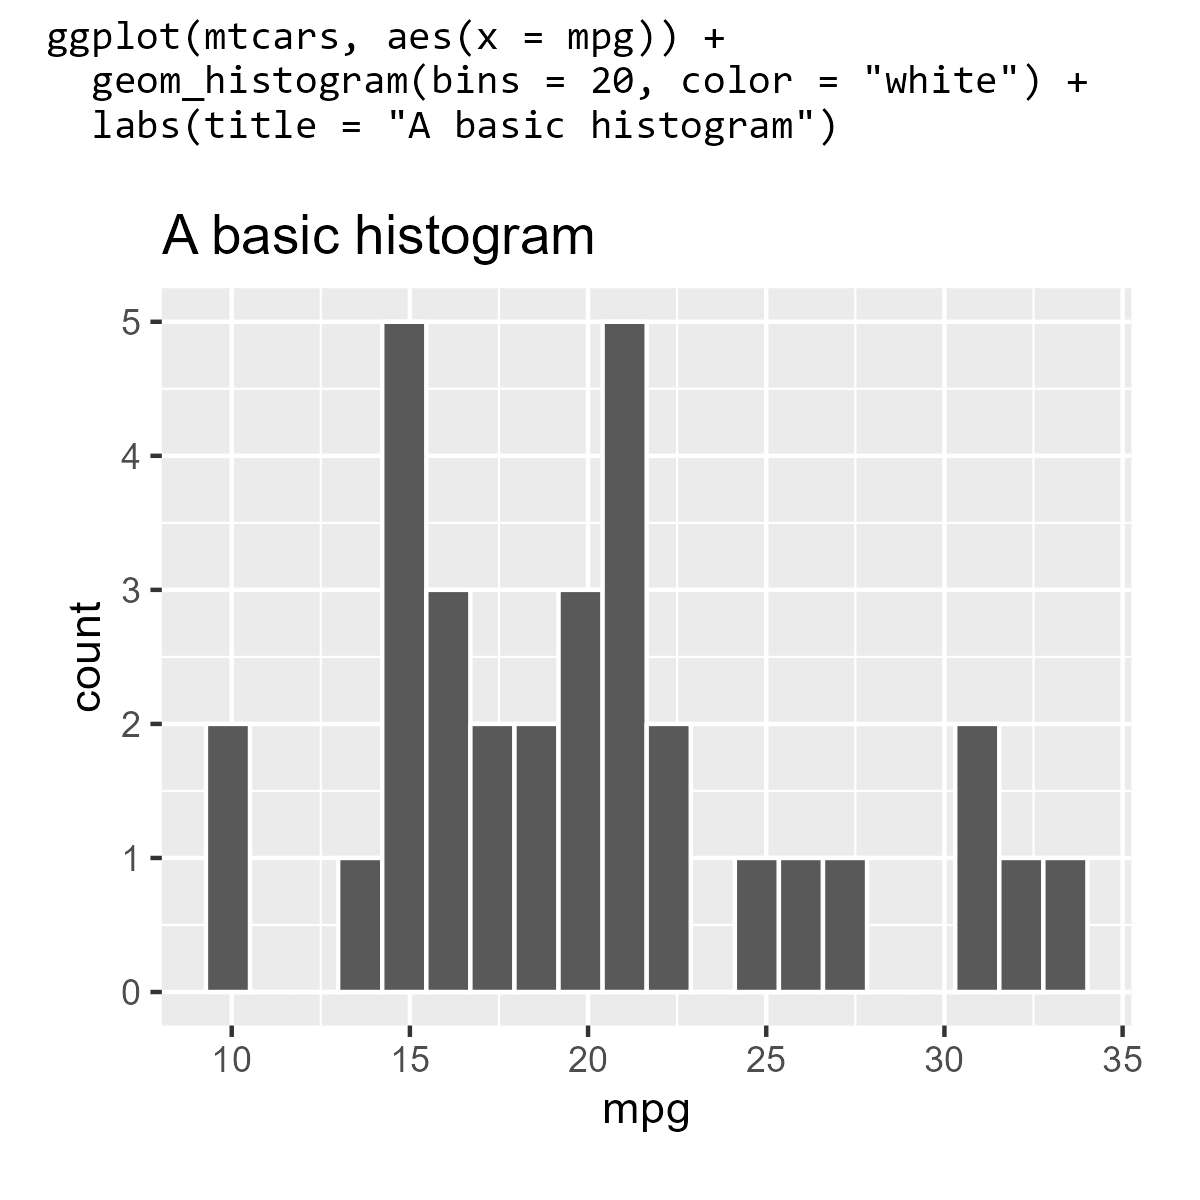 A ggplot2 plot of a histogram with the plotting code above the image.